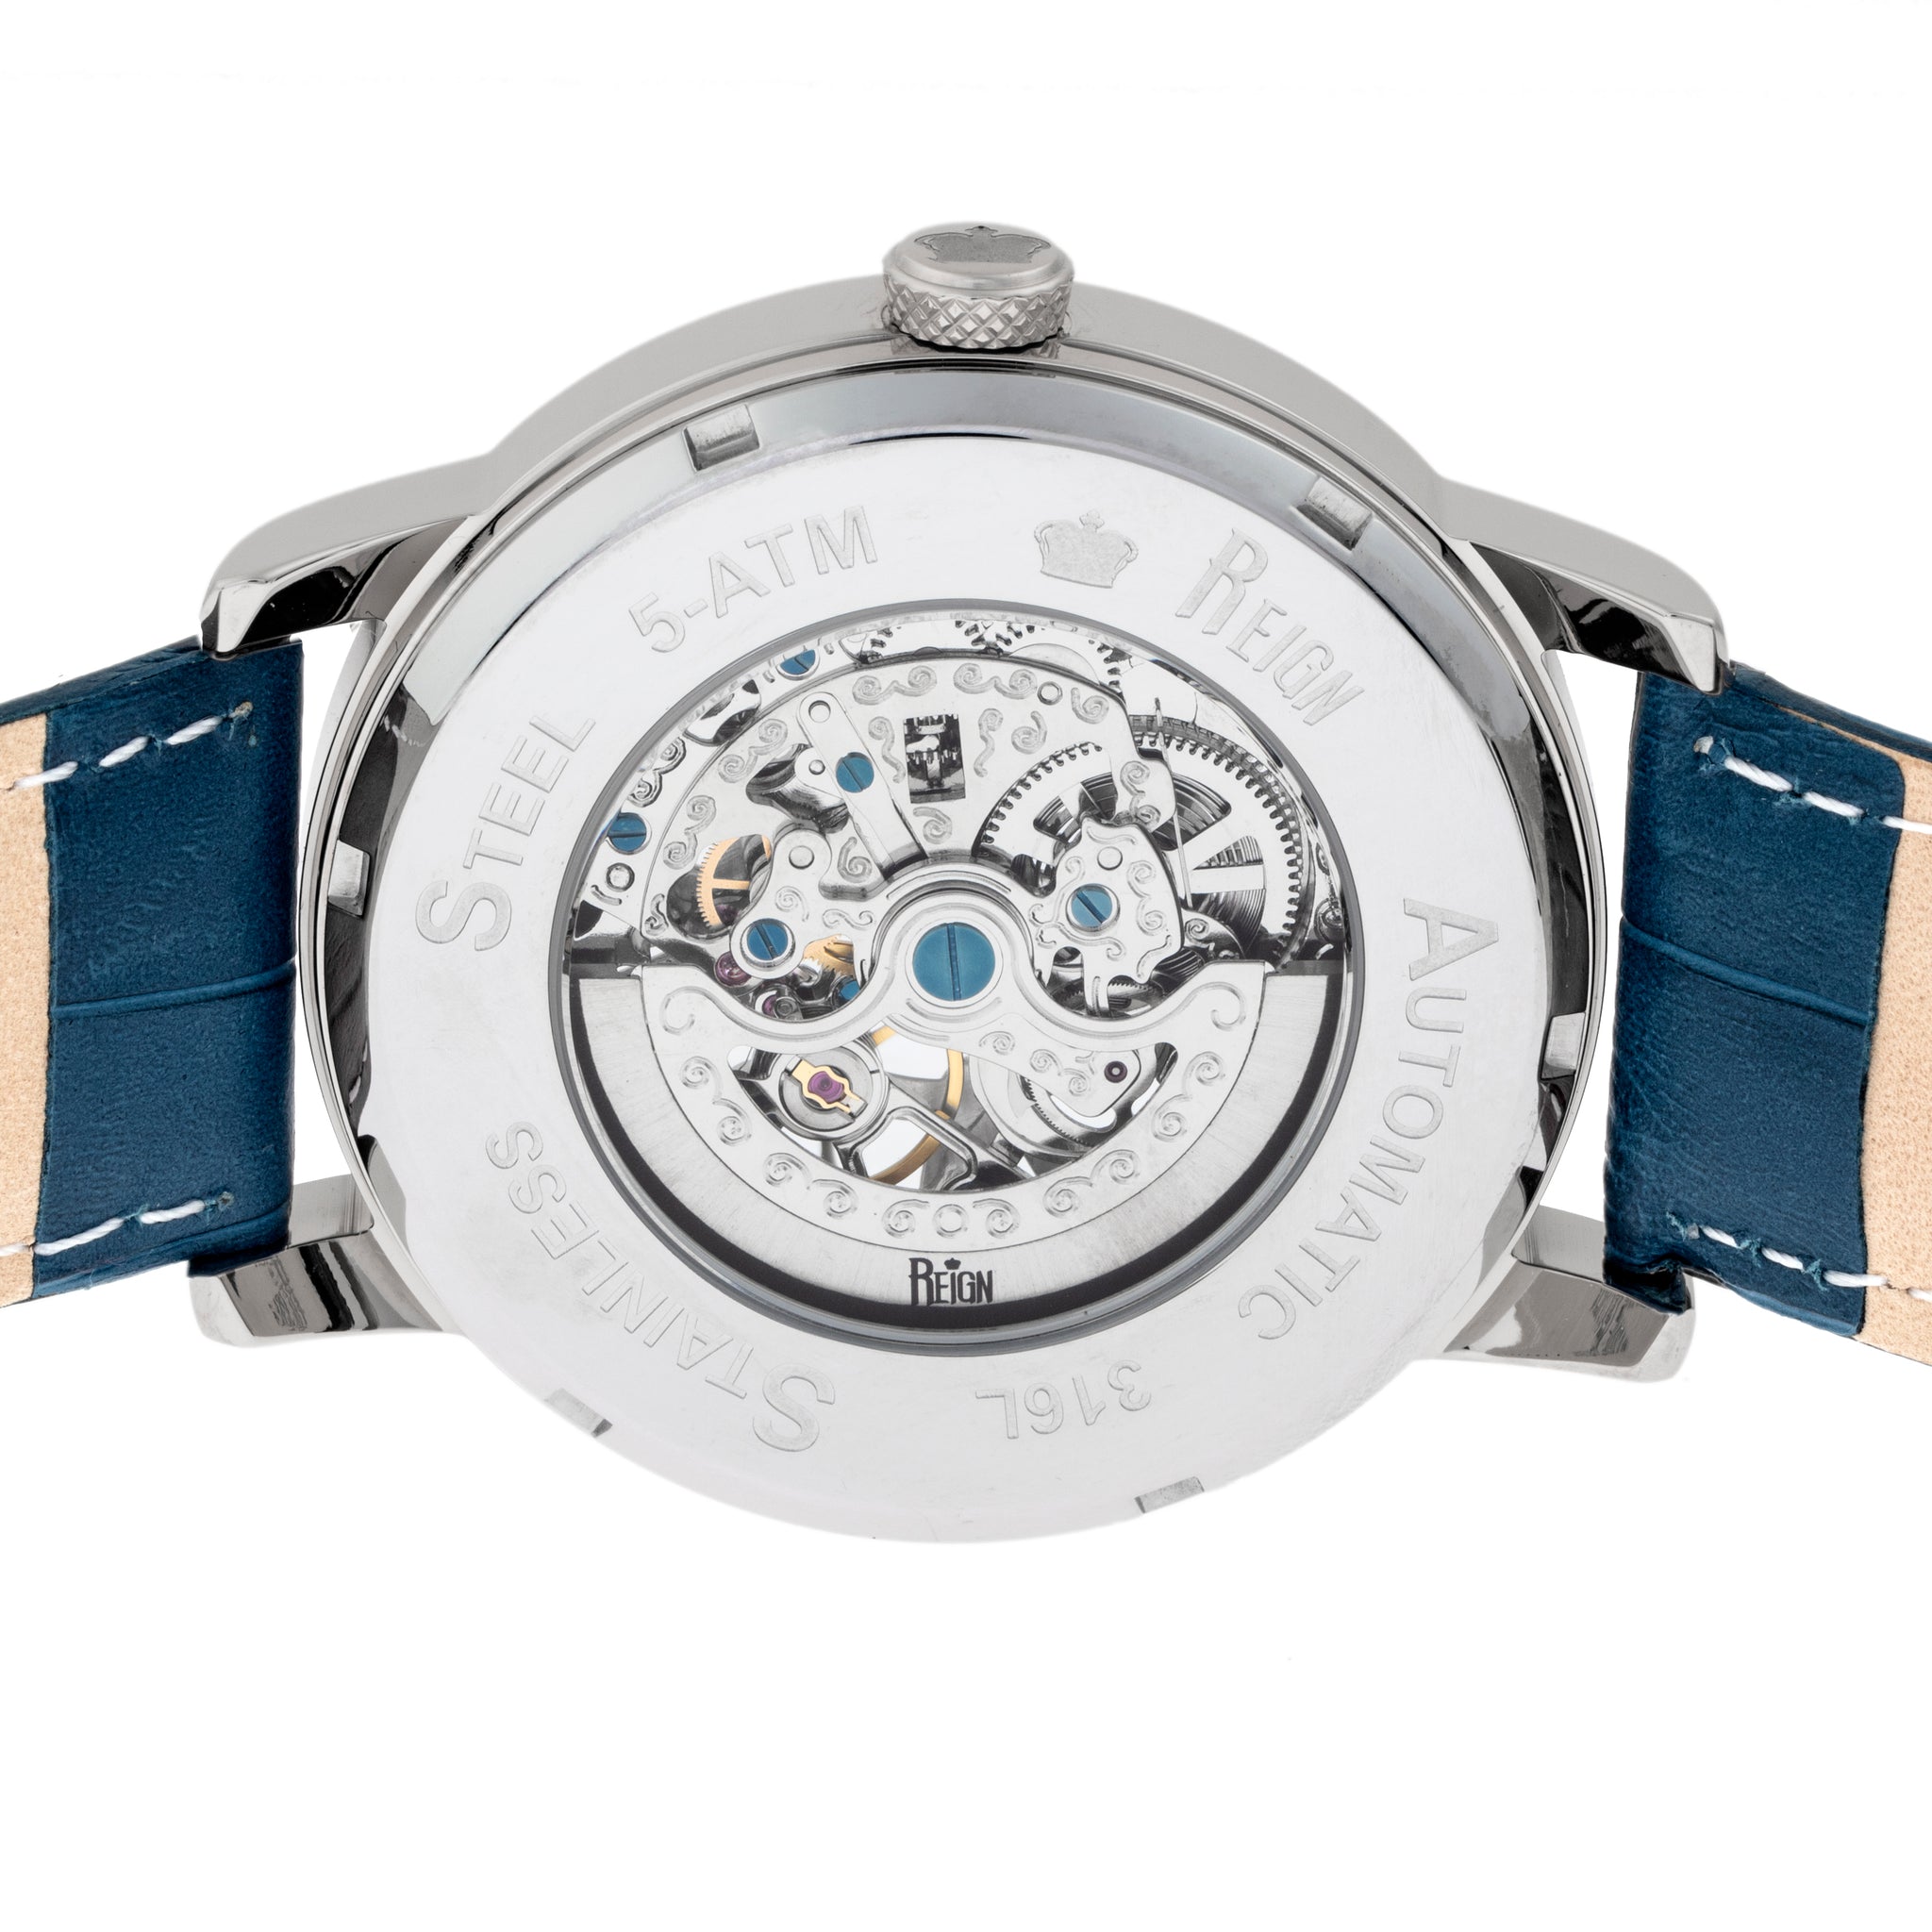 Reign Belfour Automatic Skeleton Leather-Band Watch - Silver/Blue - REIRN3603